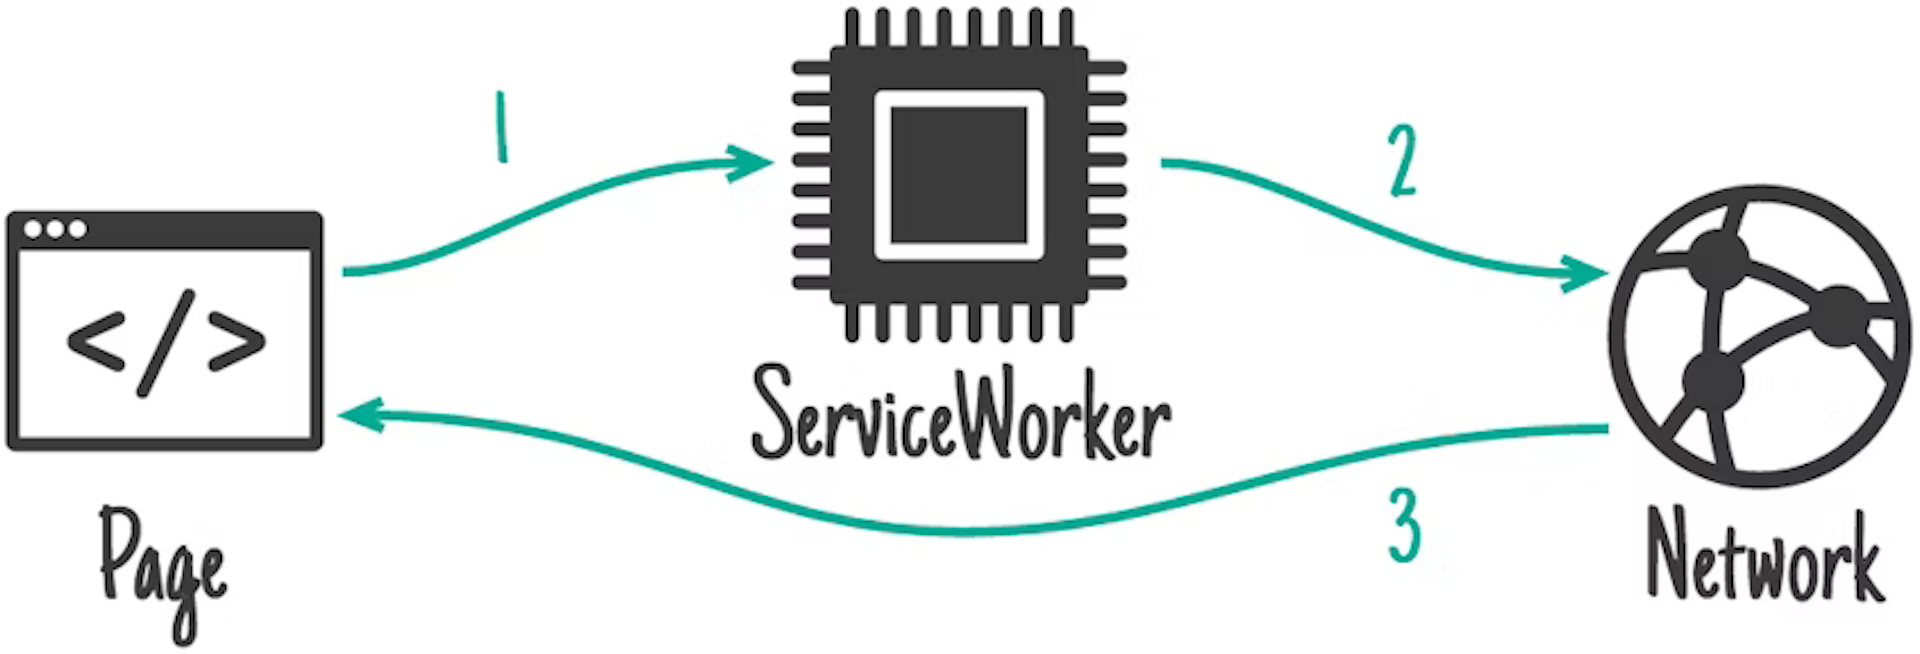 Service Worker routing